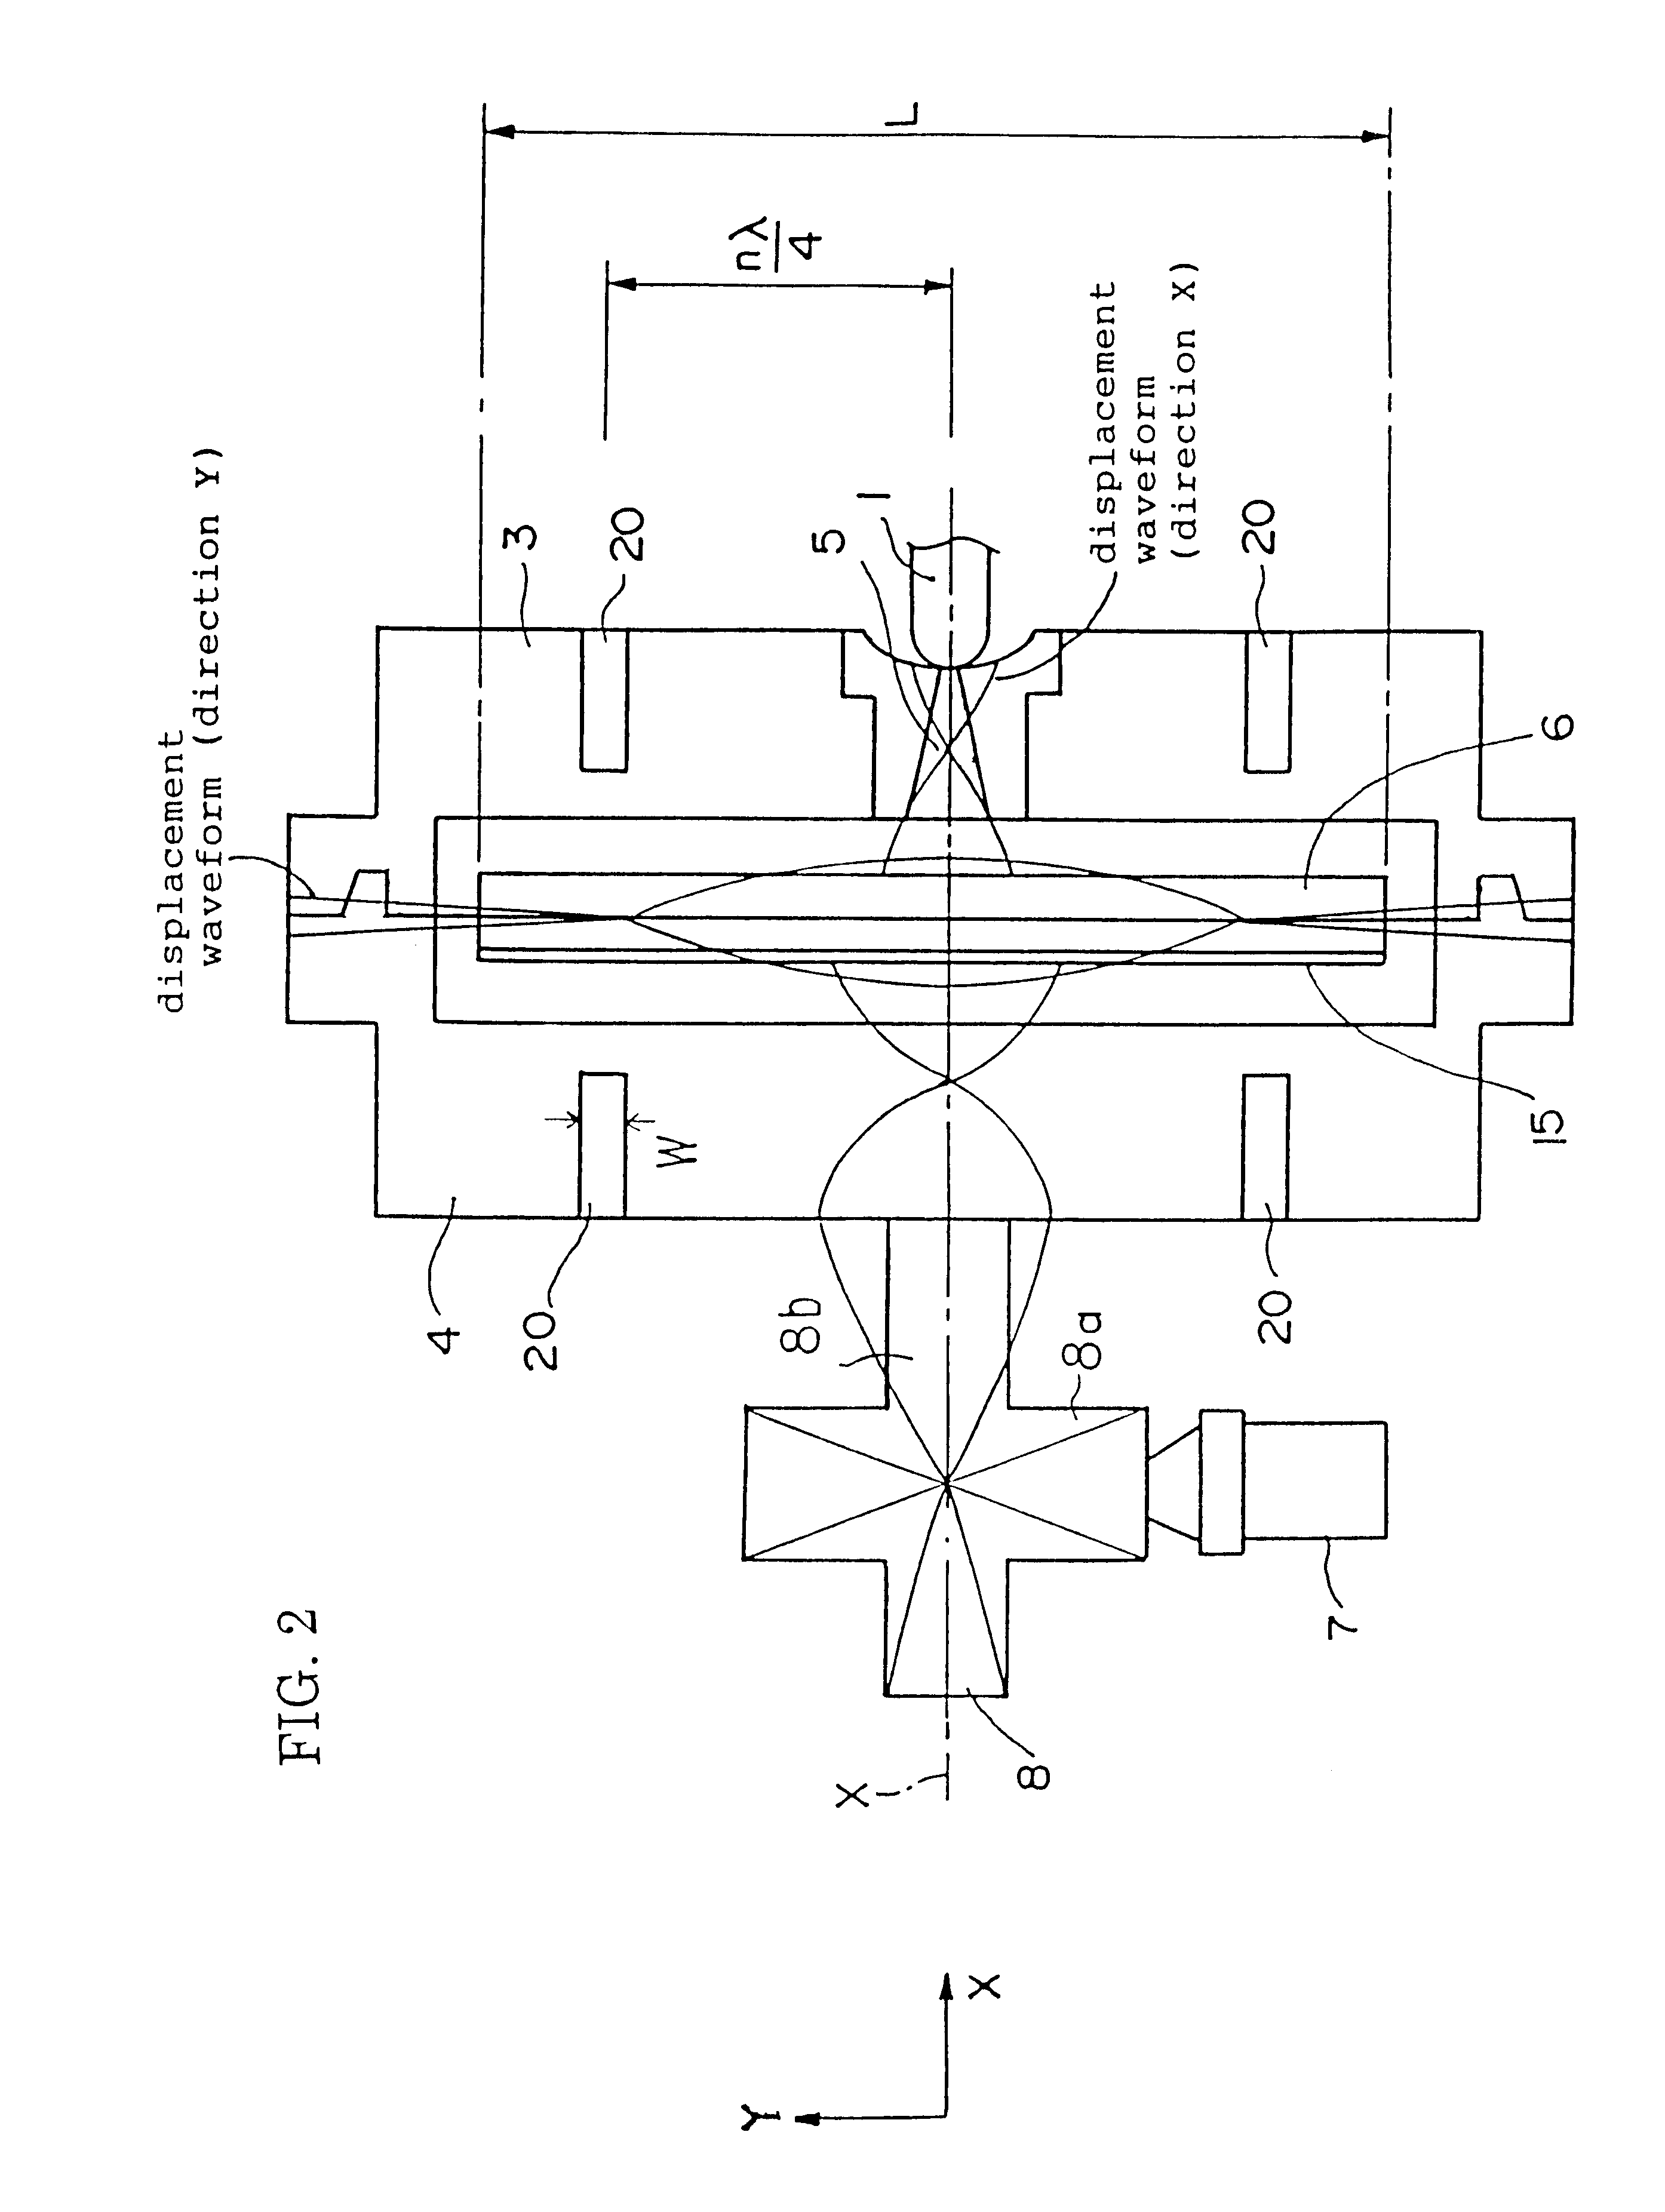 Ultrasonic injection mold for an optical disk